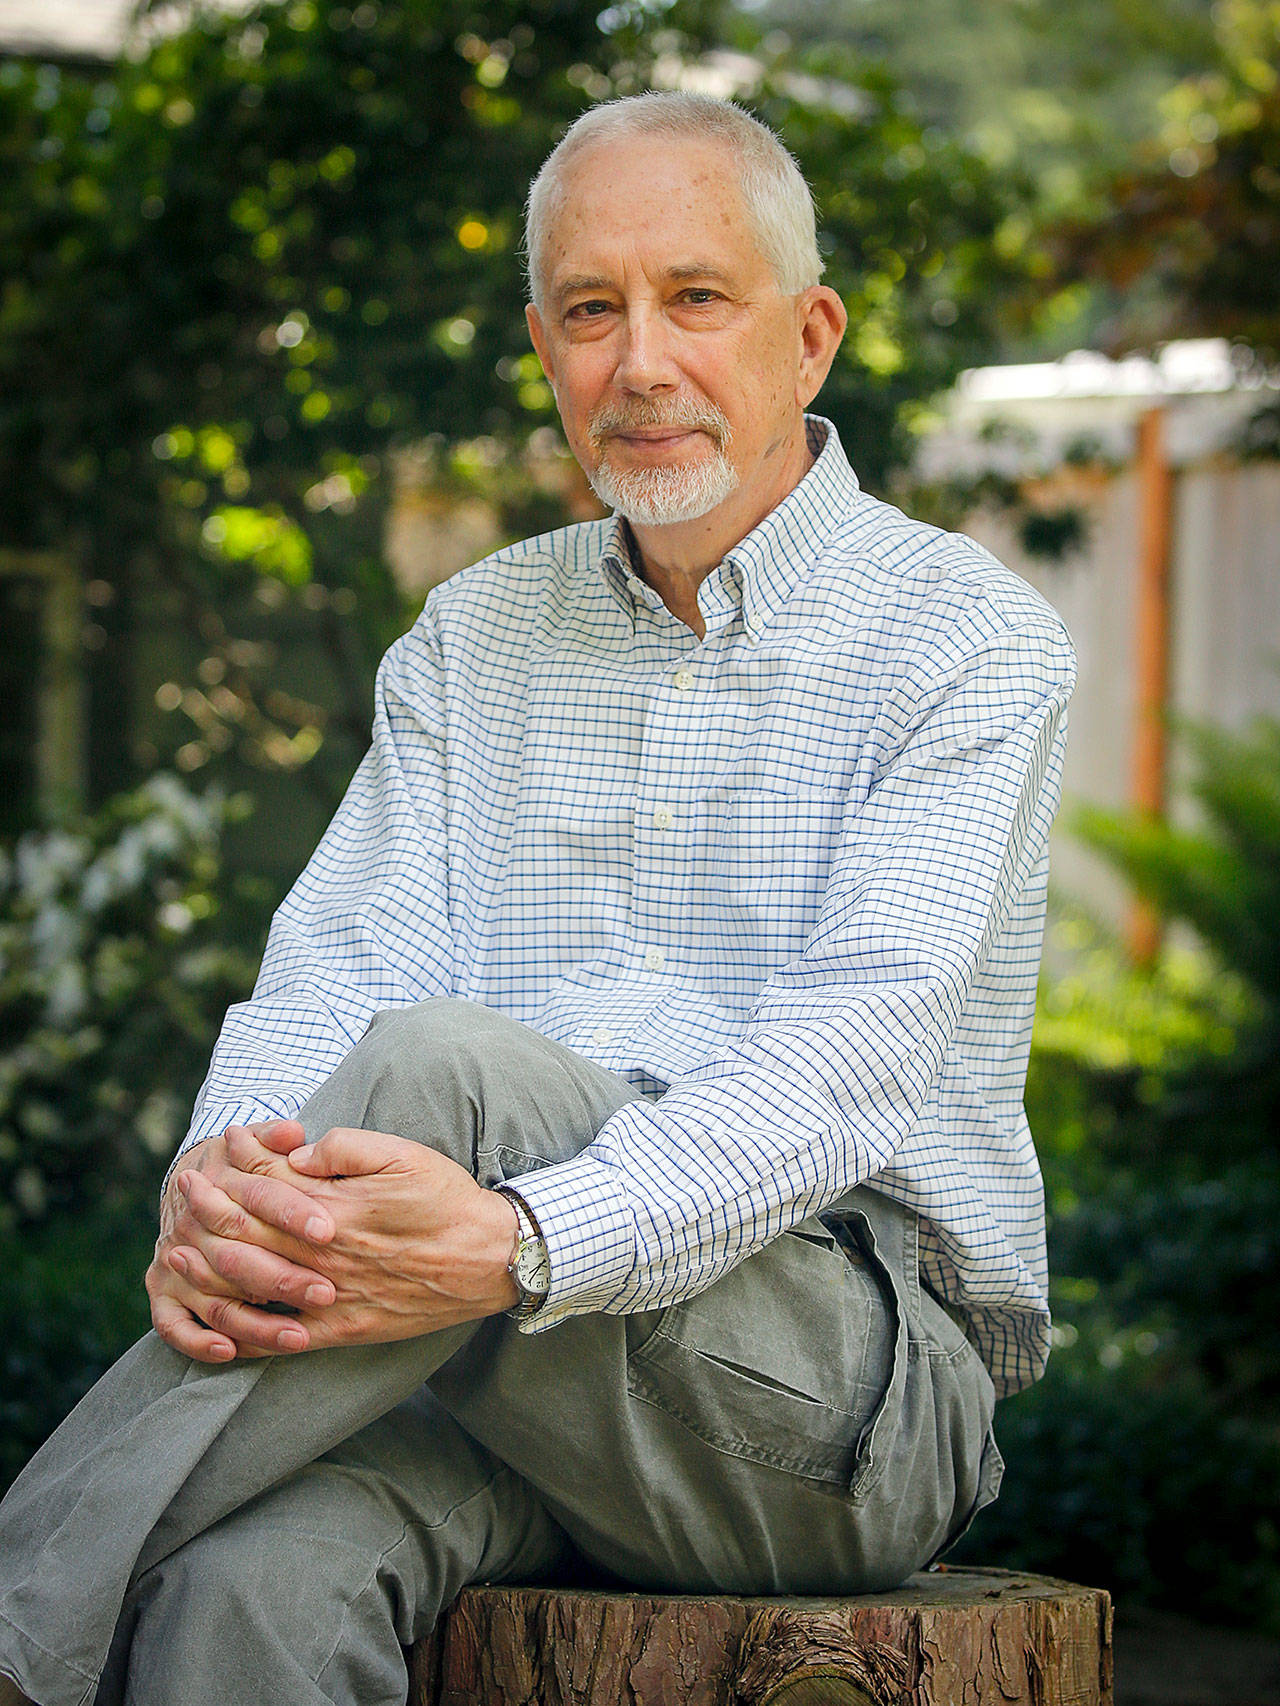 Stewart Tolnay, a 1969 Everett High grad and professor emeritus and former department head of sociology at UW, has written “Less Than Righteous,” a novel of racial strife largely centered in Everett. (Kevin Clark / The Herald)